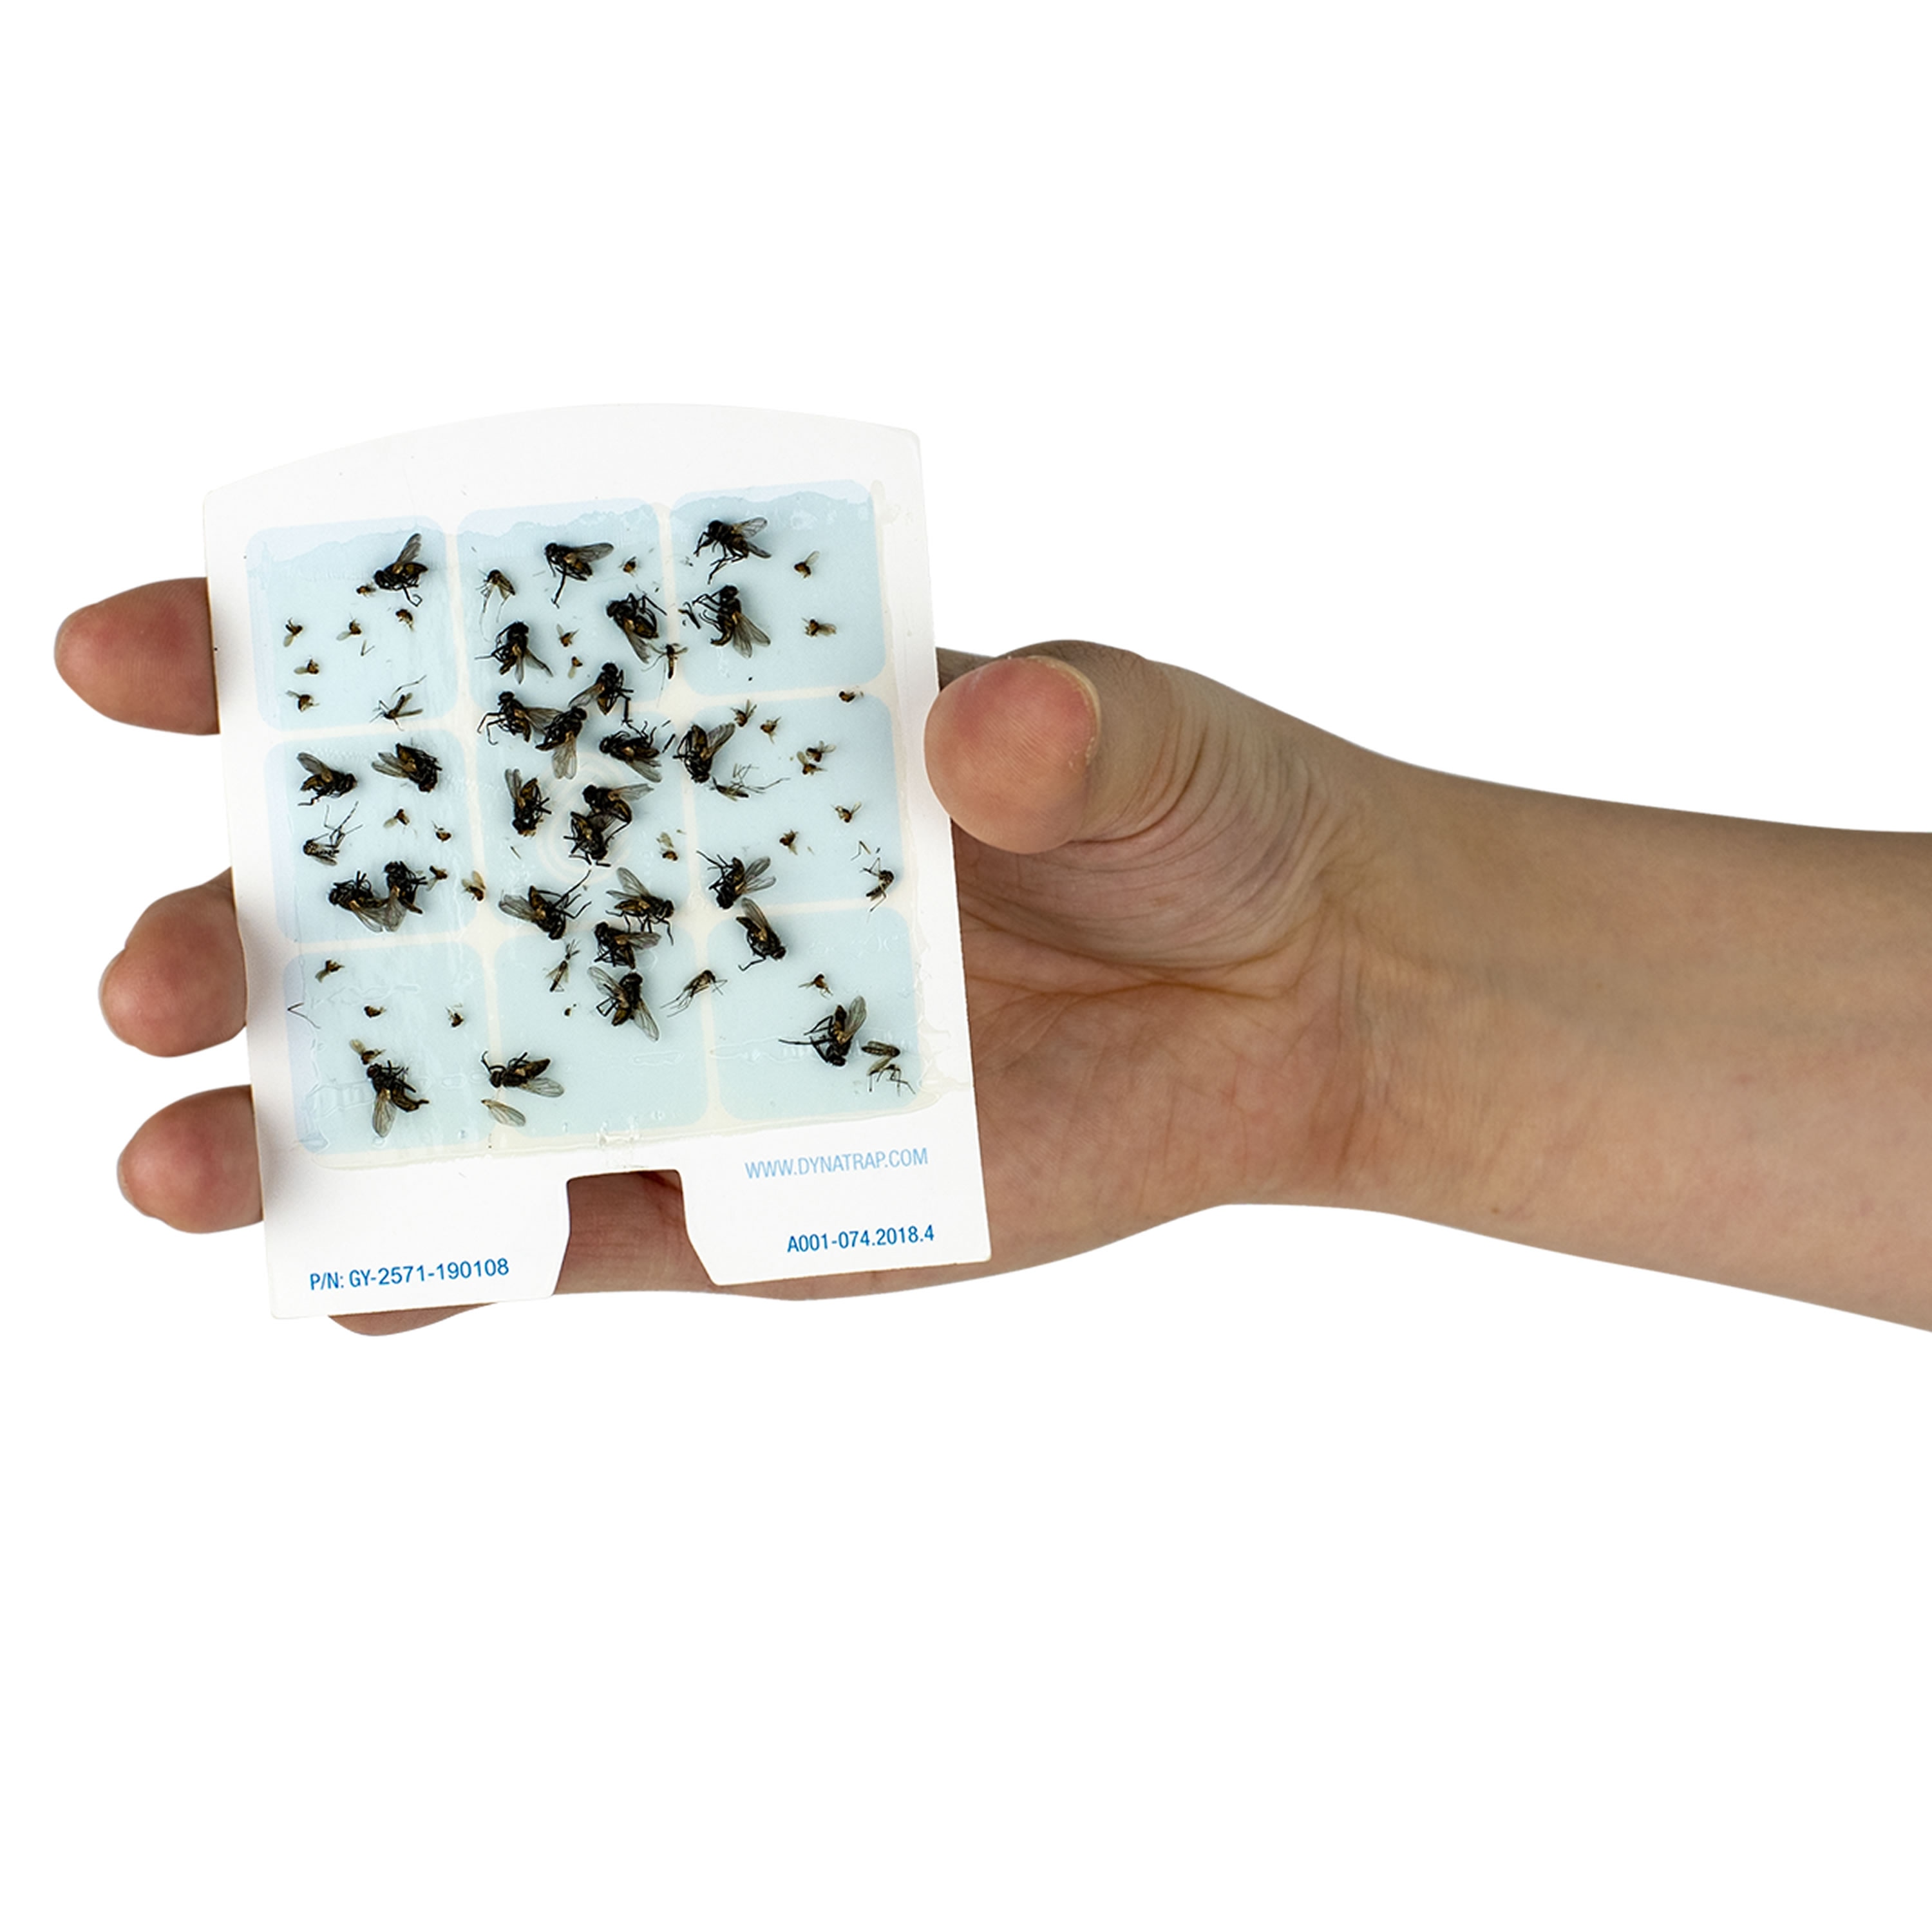 Dynatrap Dot Refill For Indoor Insect Trap